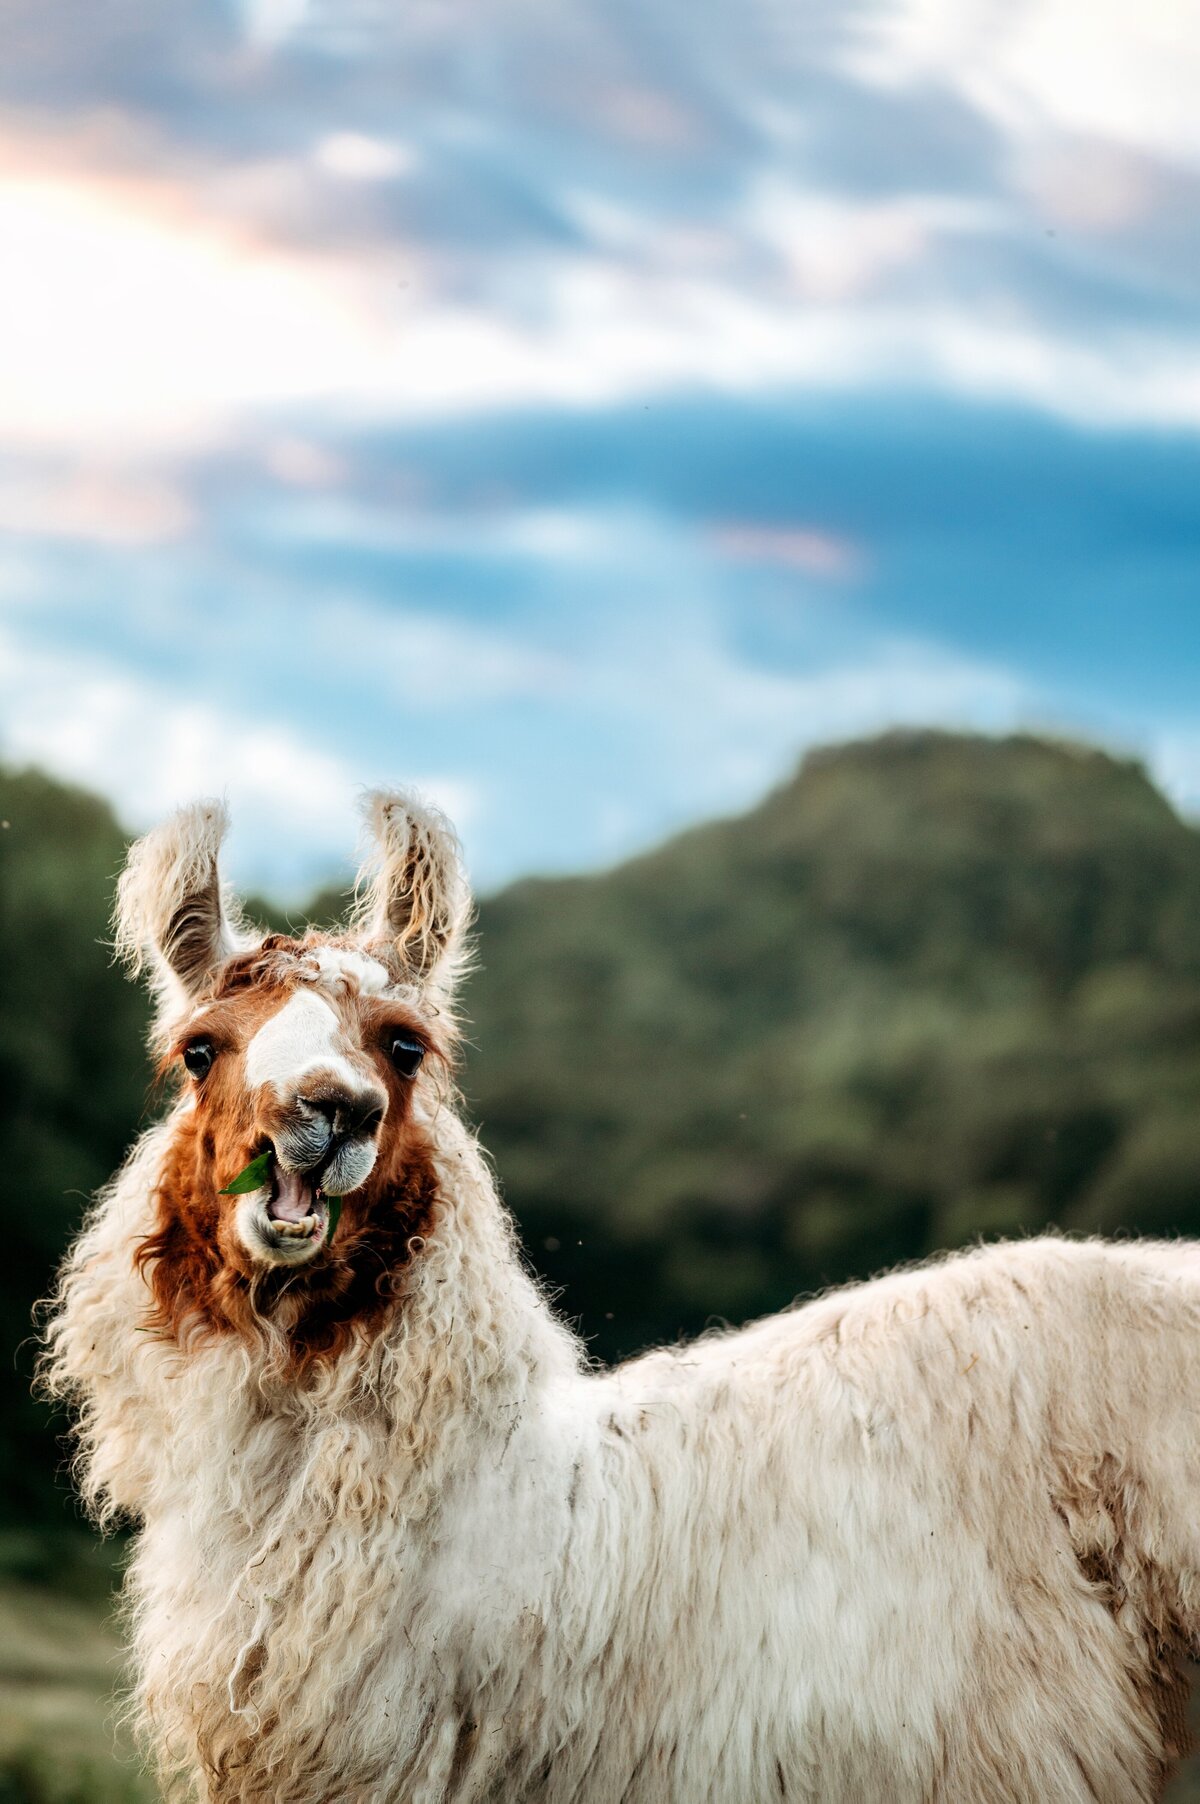 Llama McKennaPattersonPhotography